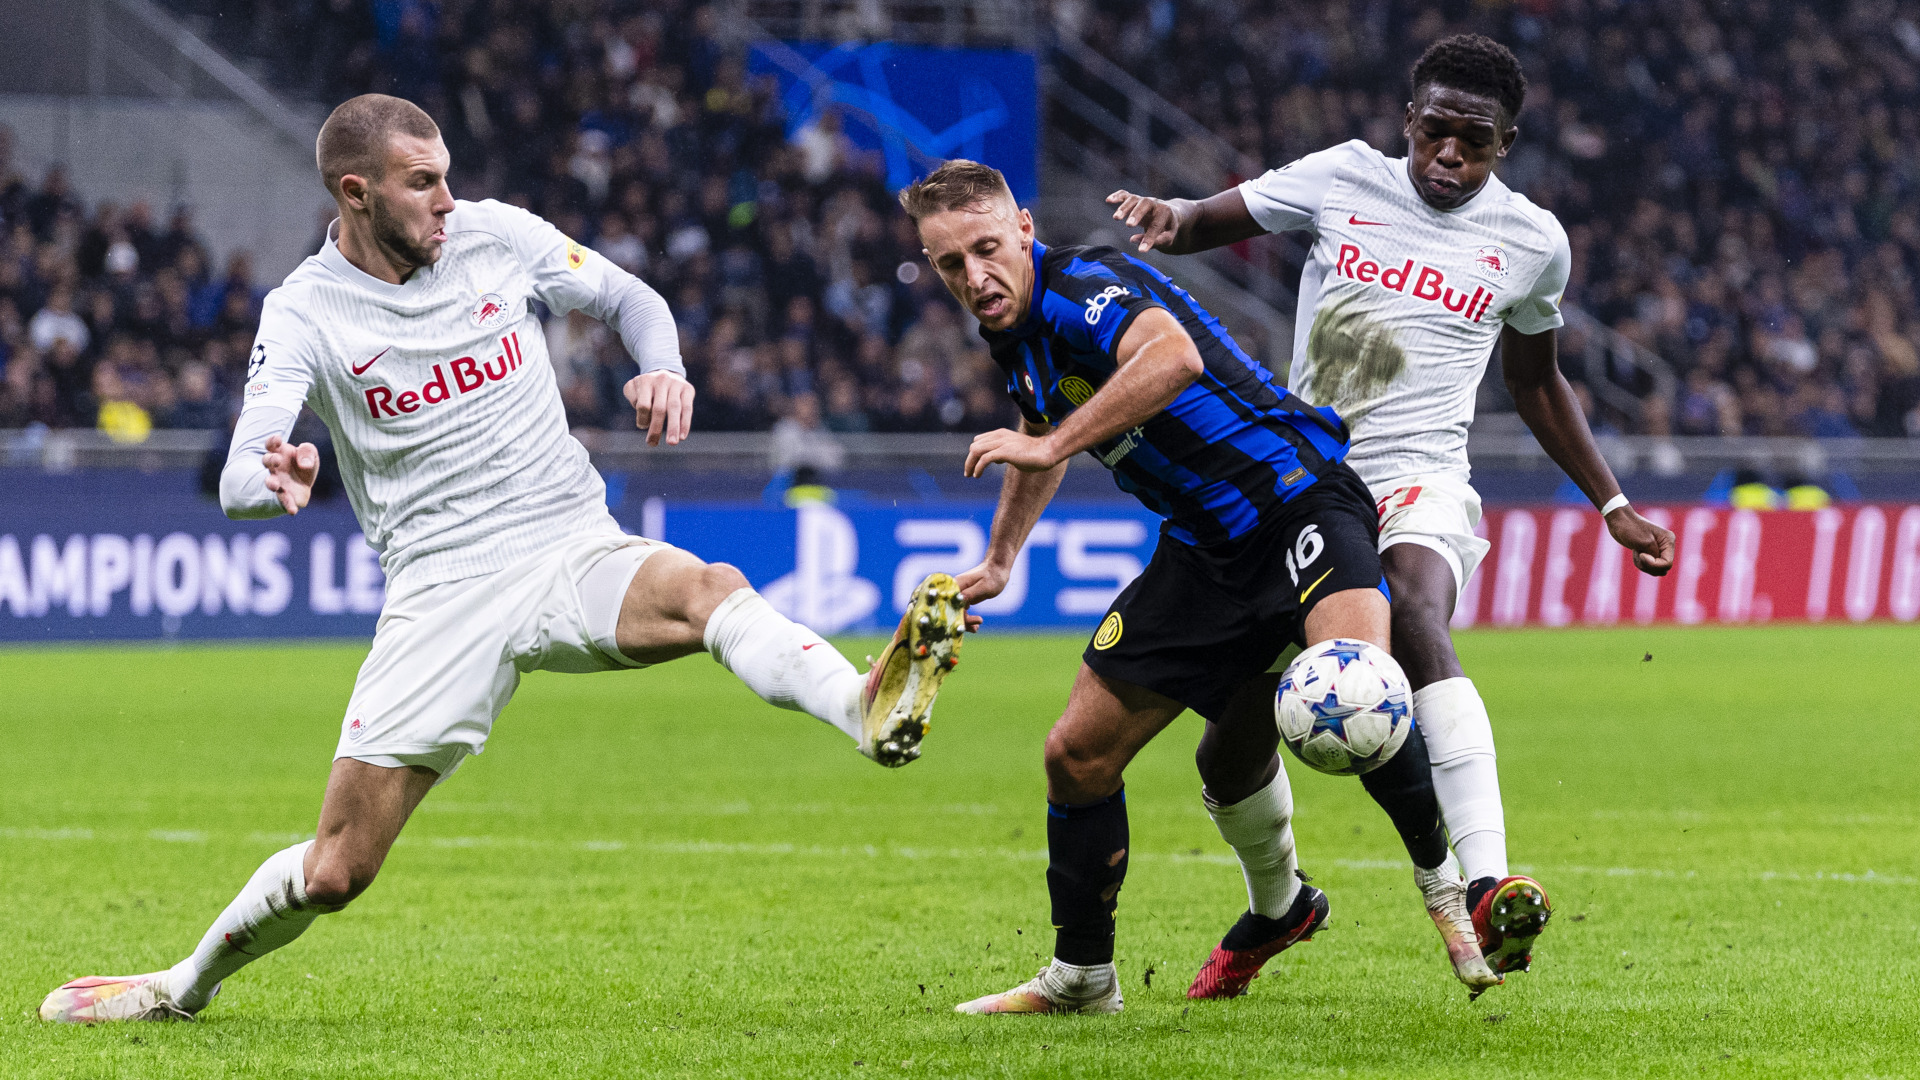 Salzburg vs Inter Milan live stream watch the Champions League match online and for free, team news What to Watch